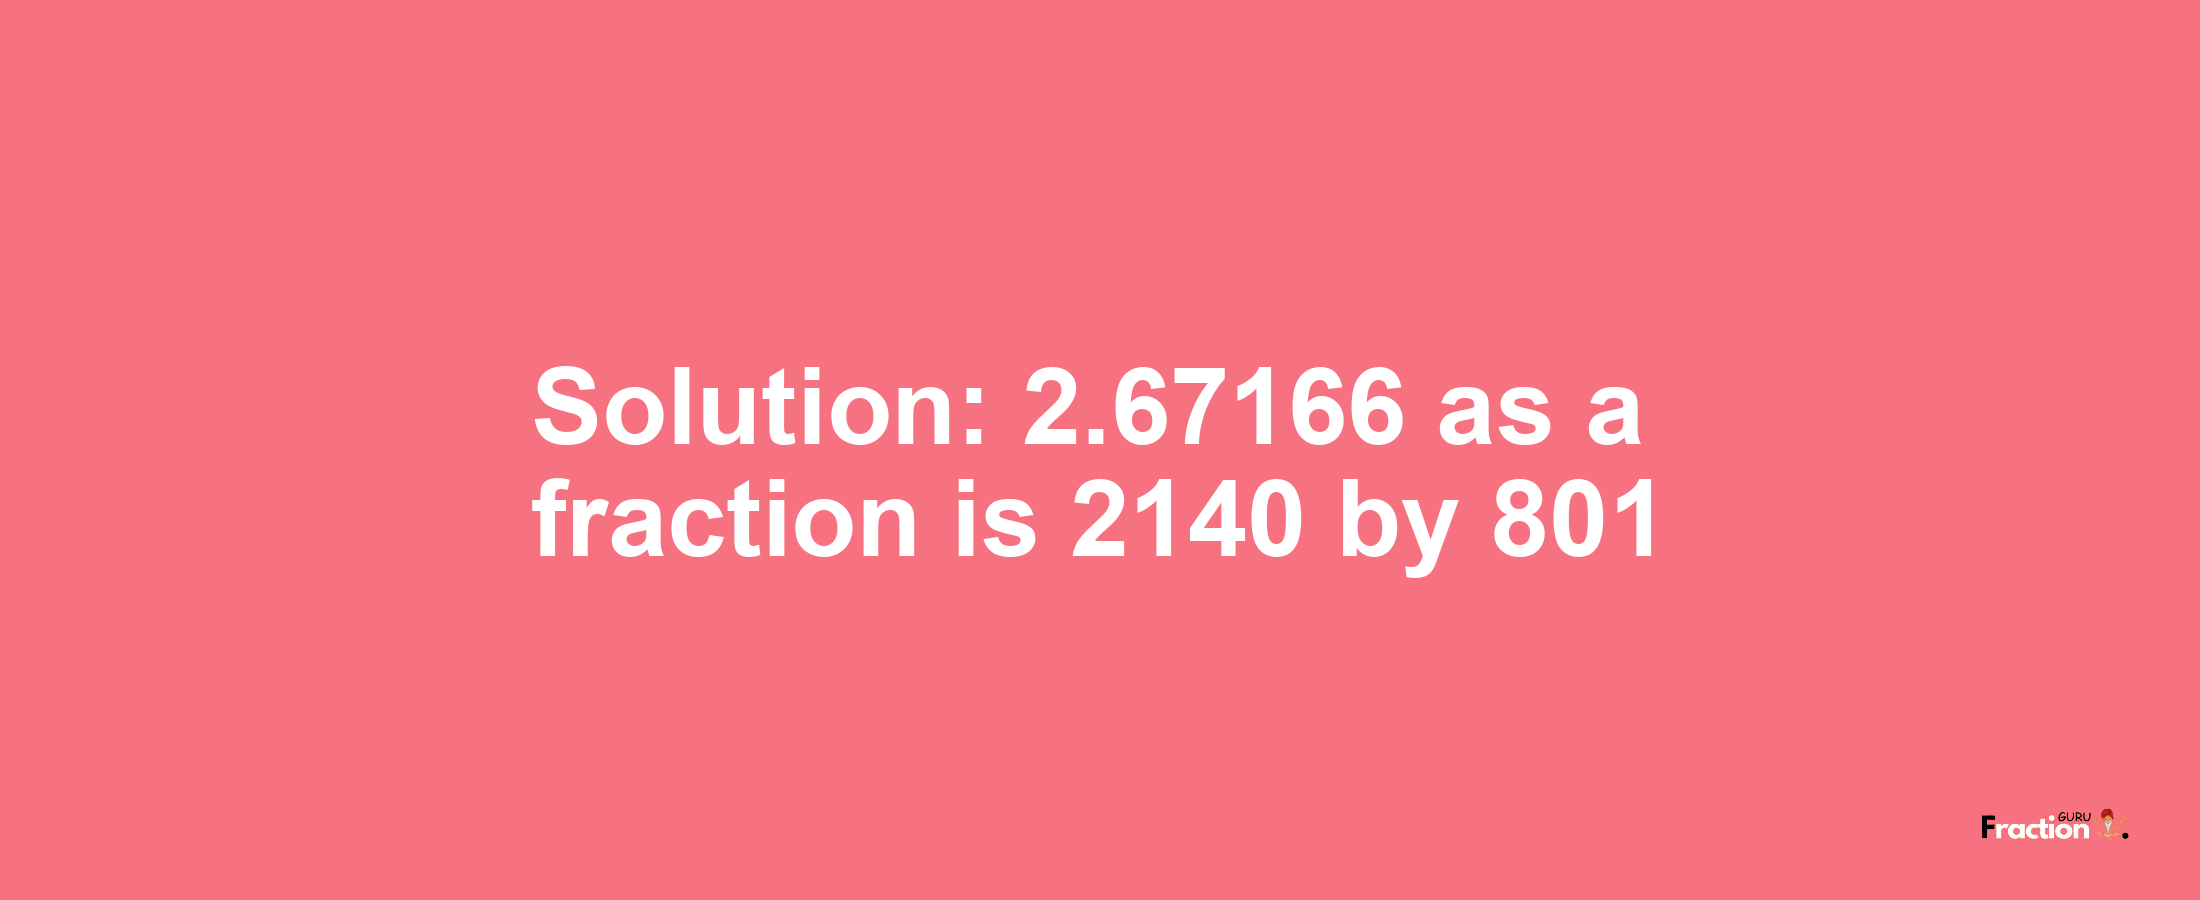 Solution:2.67166 as a fraction is 2140/801